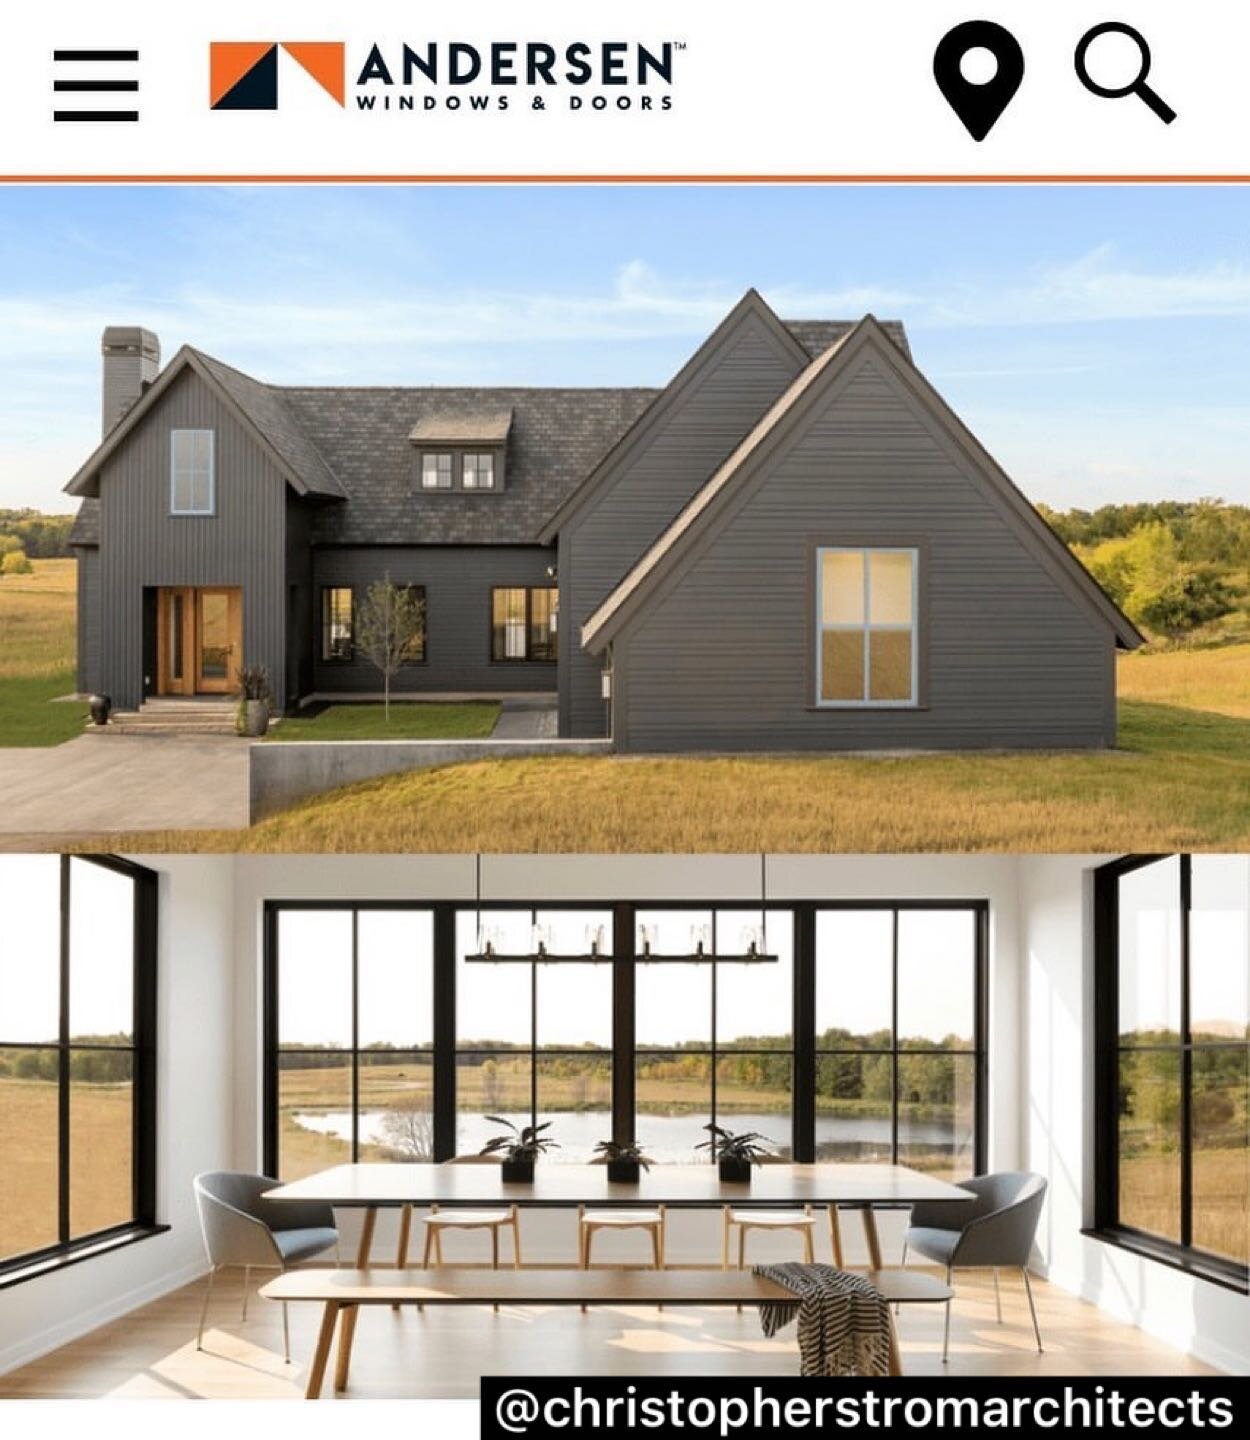 &ldquo;Eyeland,&rdquo; a modern farmhouse designed by @ChristoperStromArchitects, interiors by @InUnisonDesign and built by @RedstoneArchitecturalHomes was featured in a case study by @AndersenWindows.
Photography by @spacecrafting_photography #buy5g